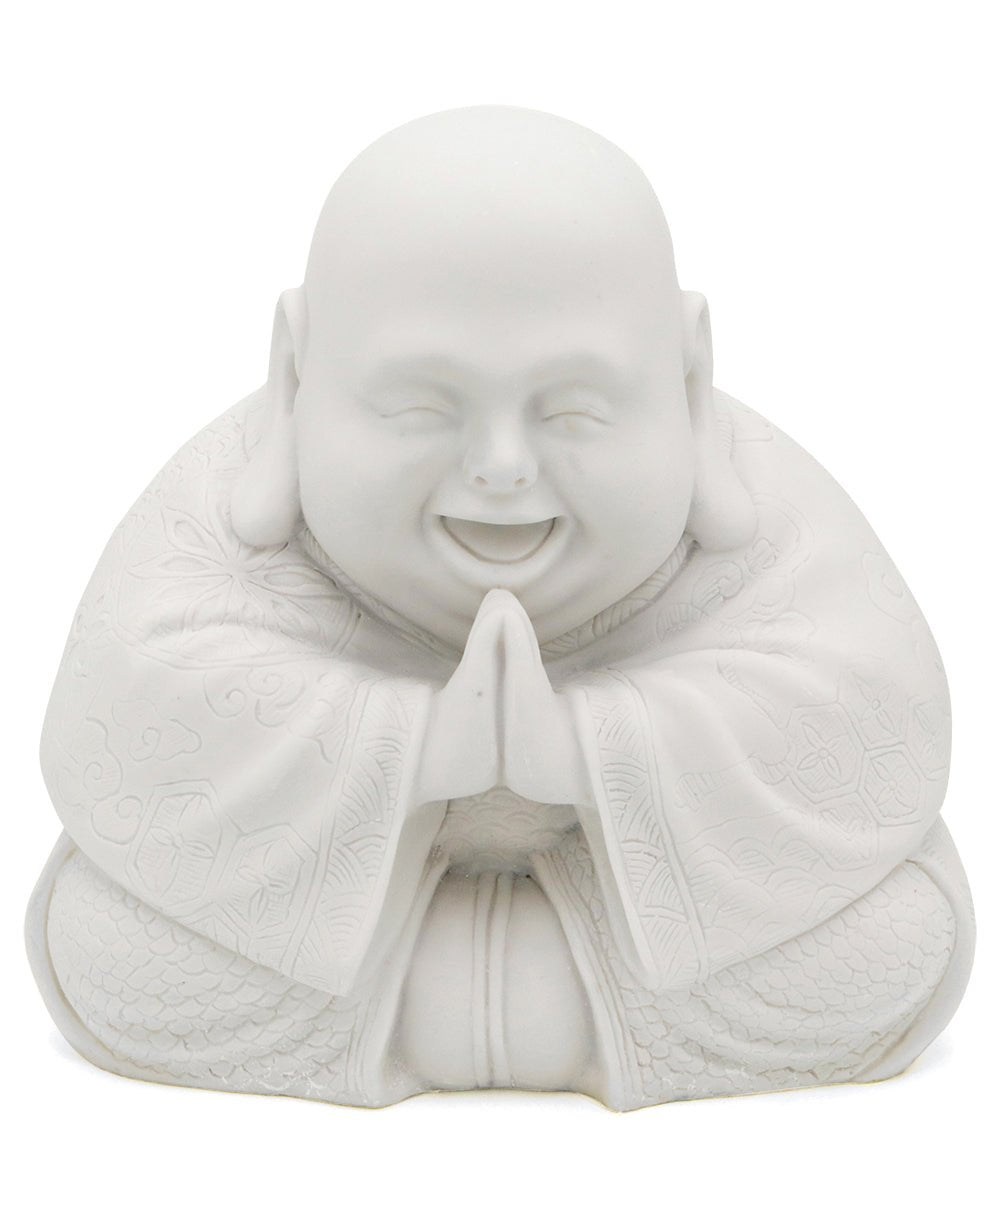 Majestic Praying Happy Buddha Statue - Sculptures & Statues White